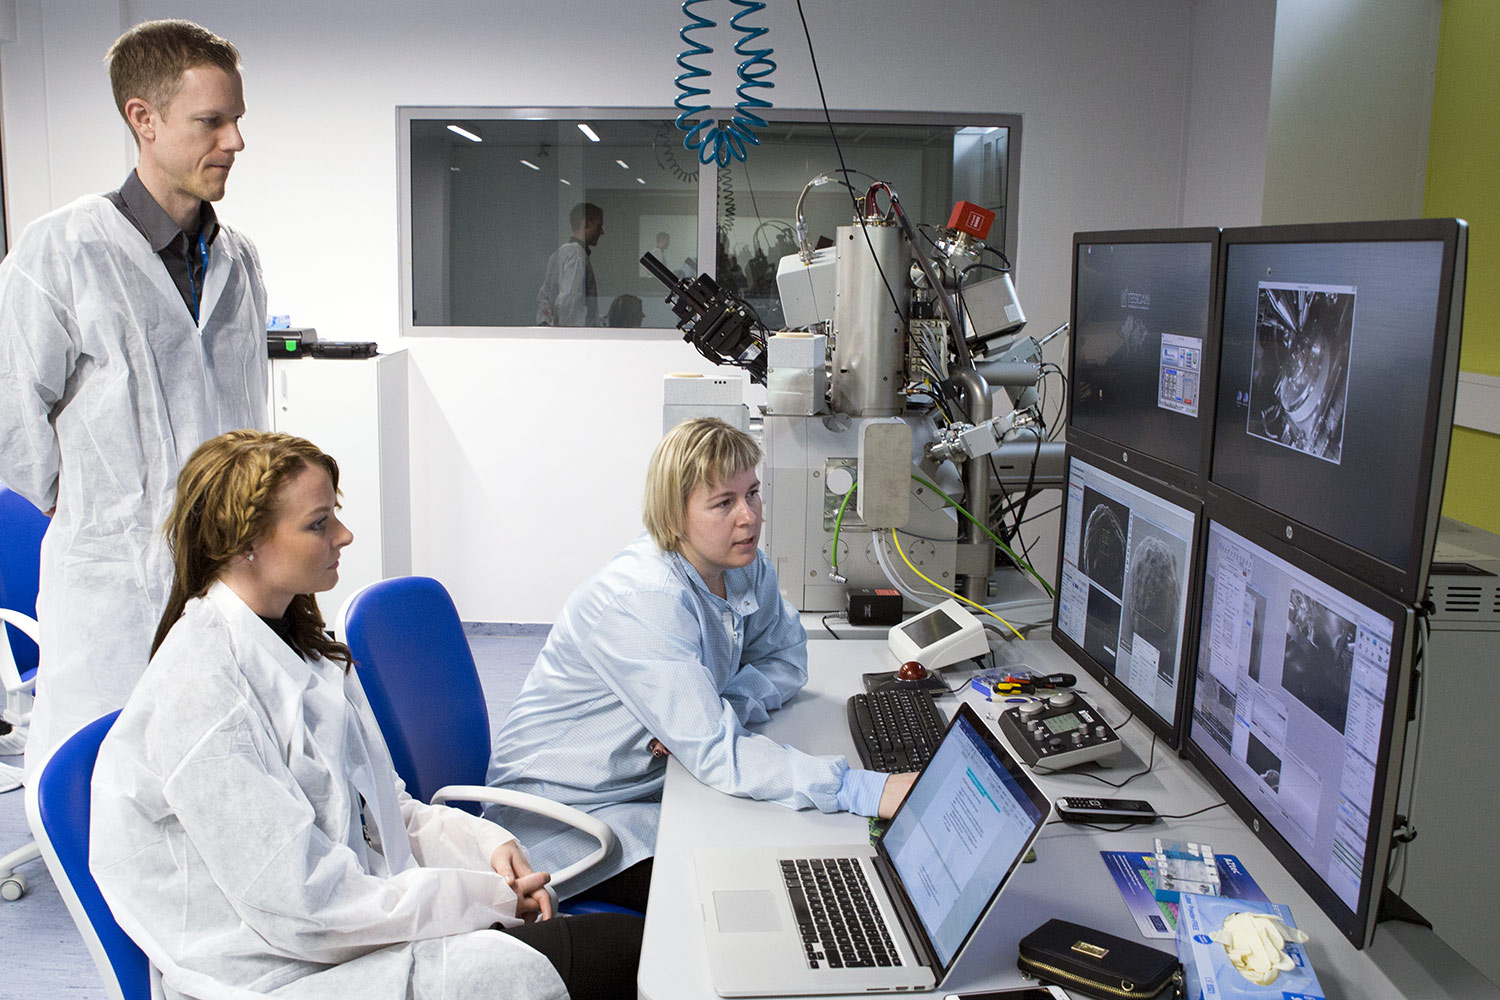 (from the left) S. Gustafsson, C. Fager and H. Tesařová in TESCAN Demo Lab, Brno